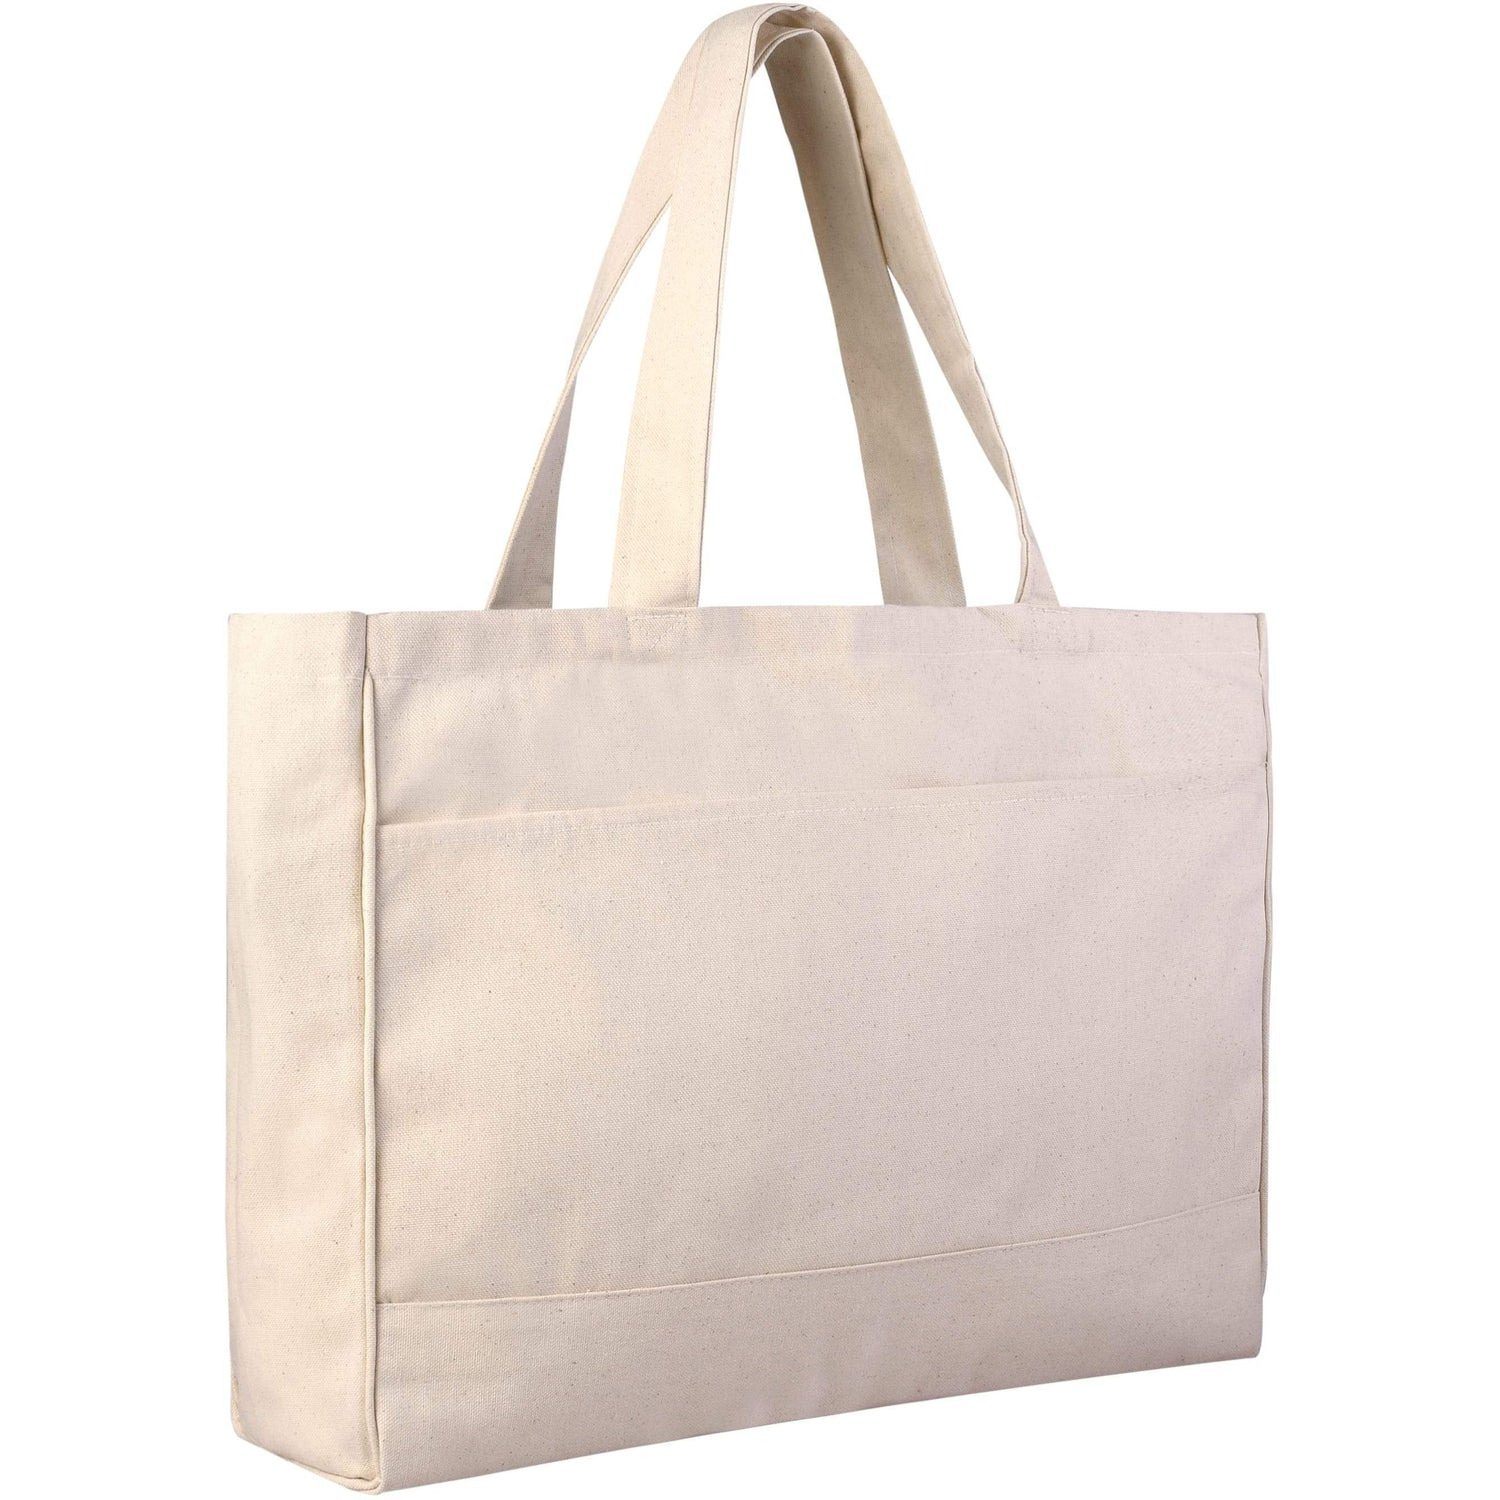 Canvas Tote Bags Wholesale, Large Canvas Tote Bag with Zipper Pocket ...